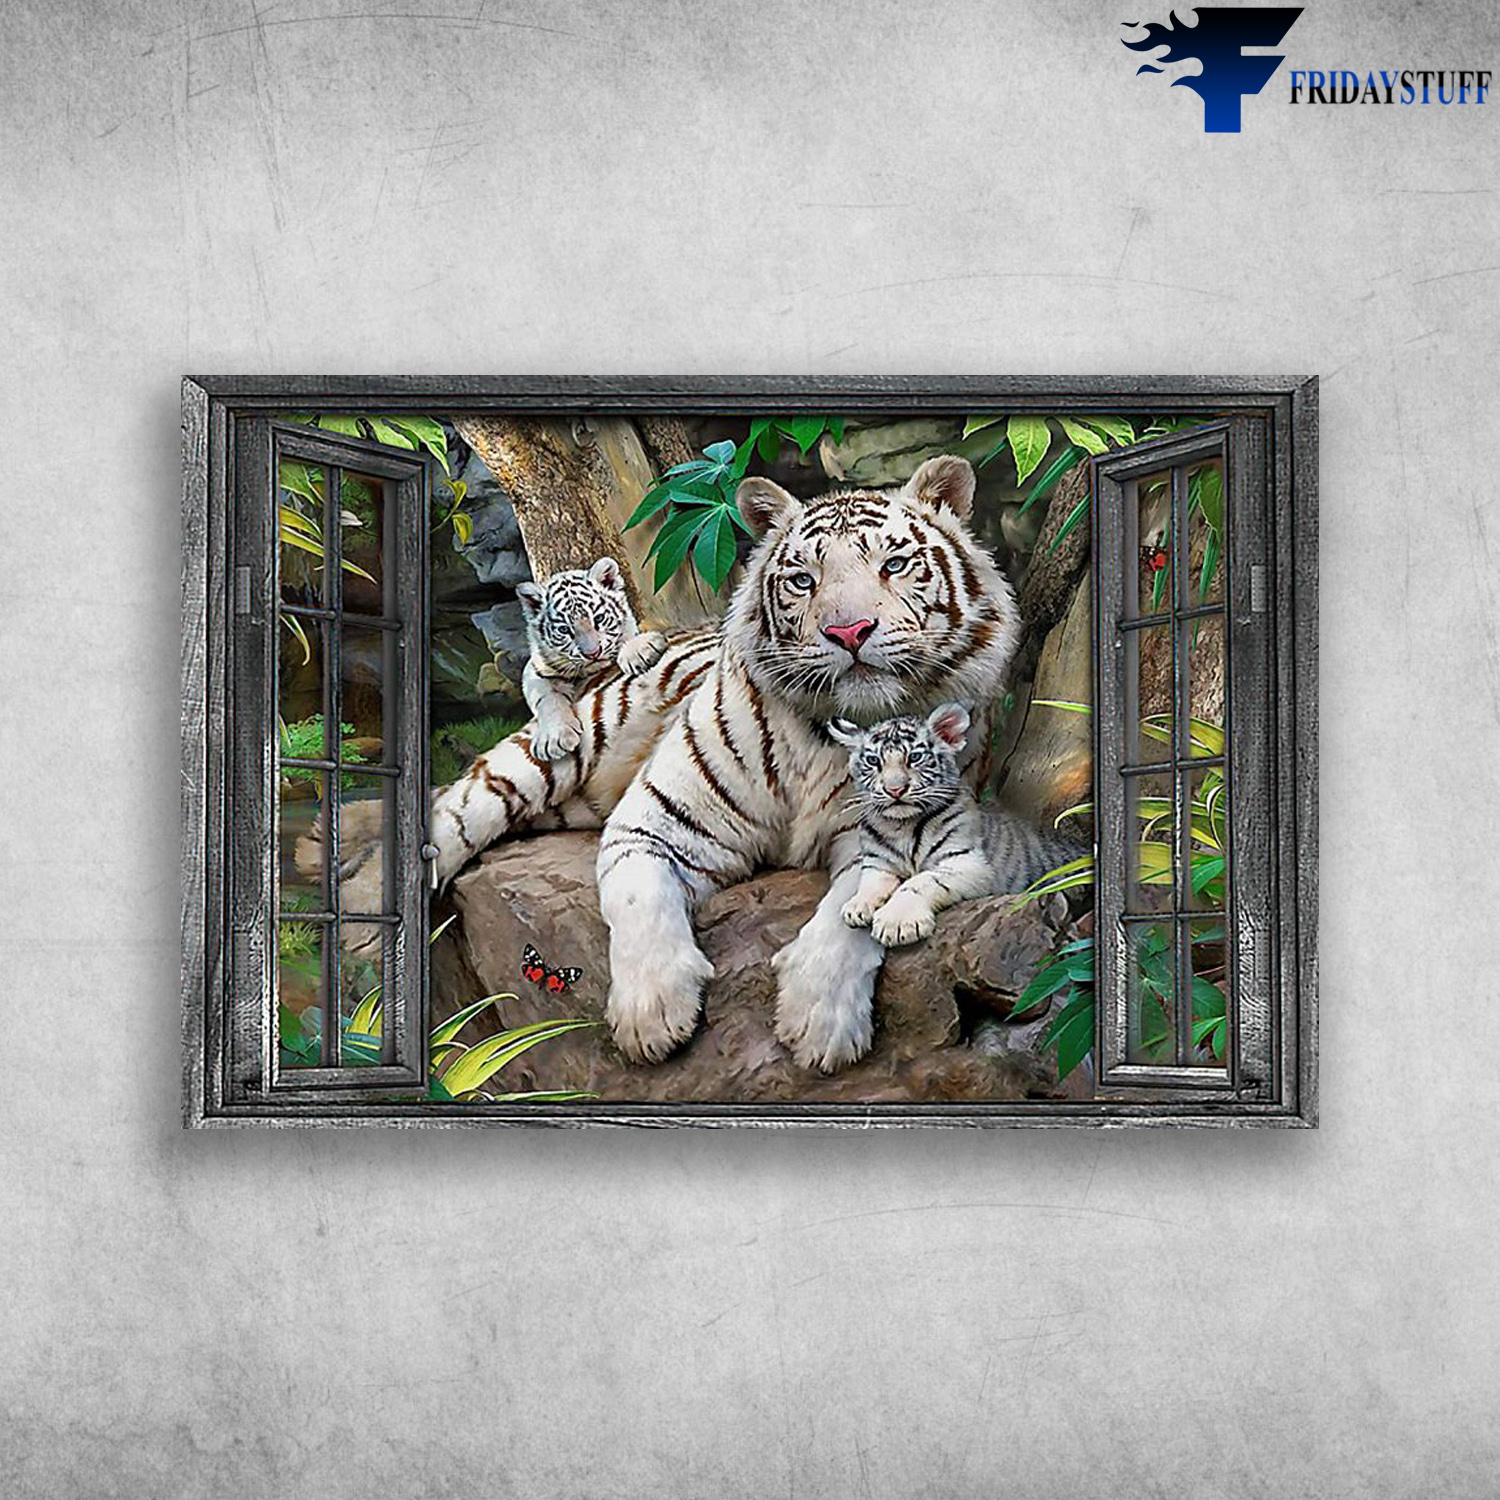 White Tigers Are Out The Window